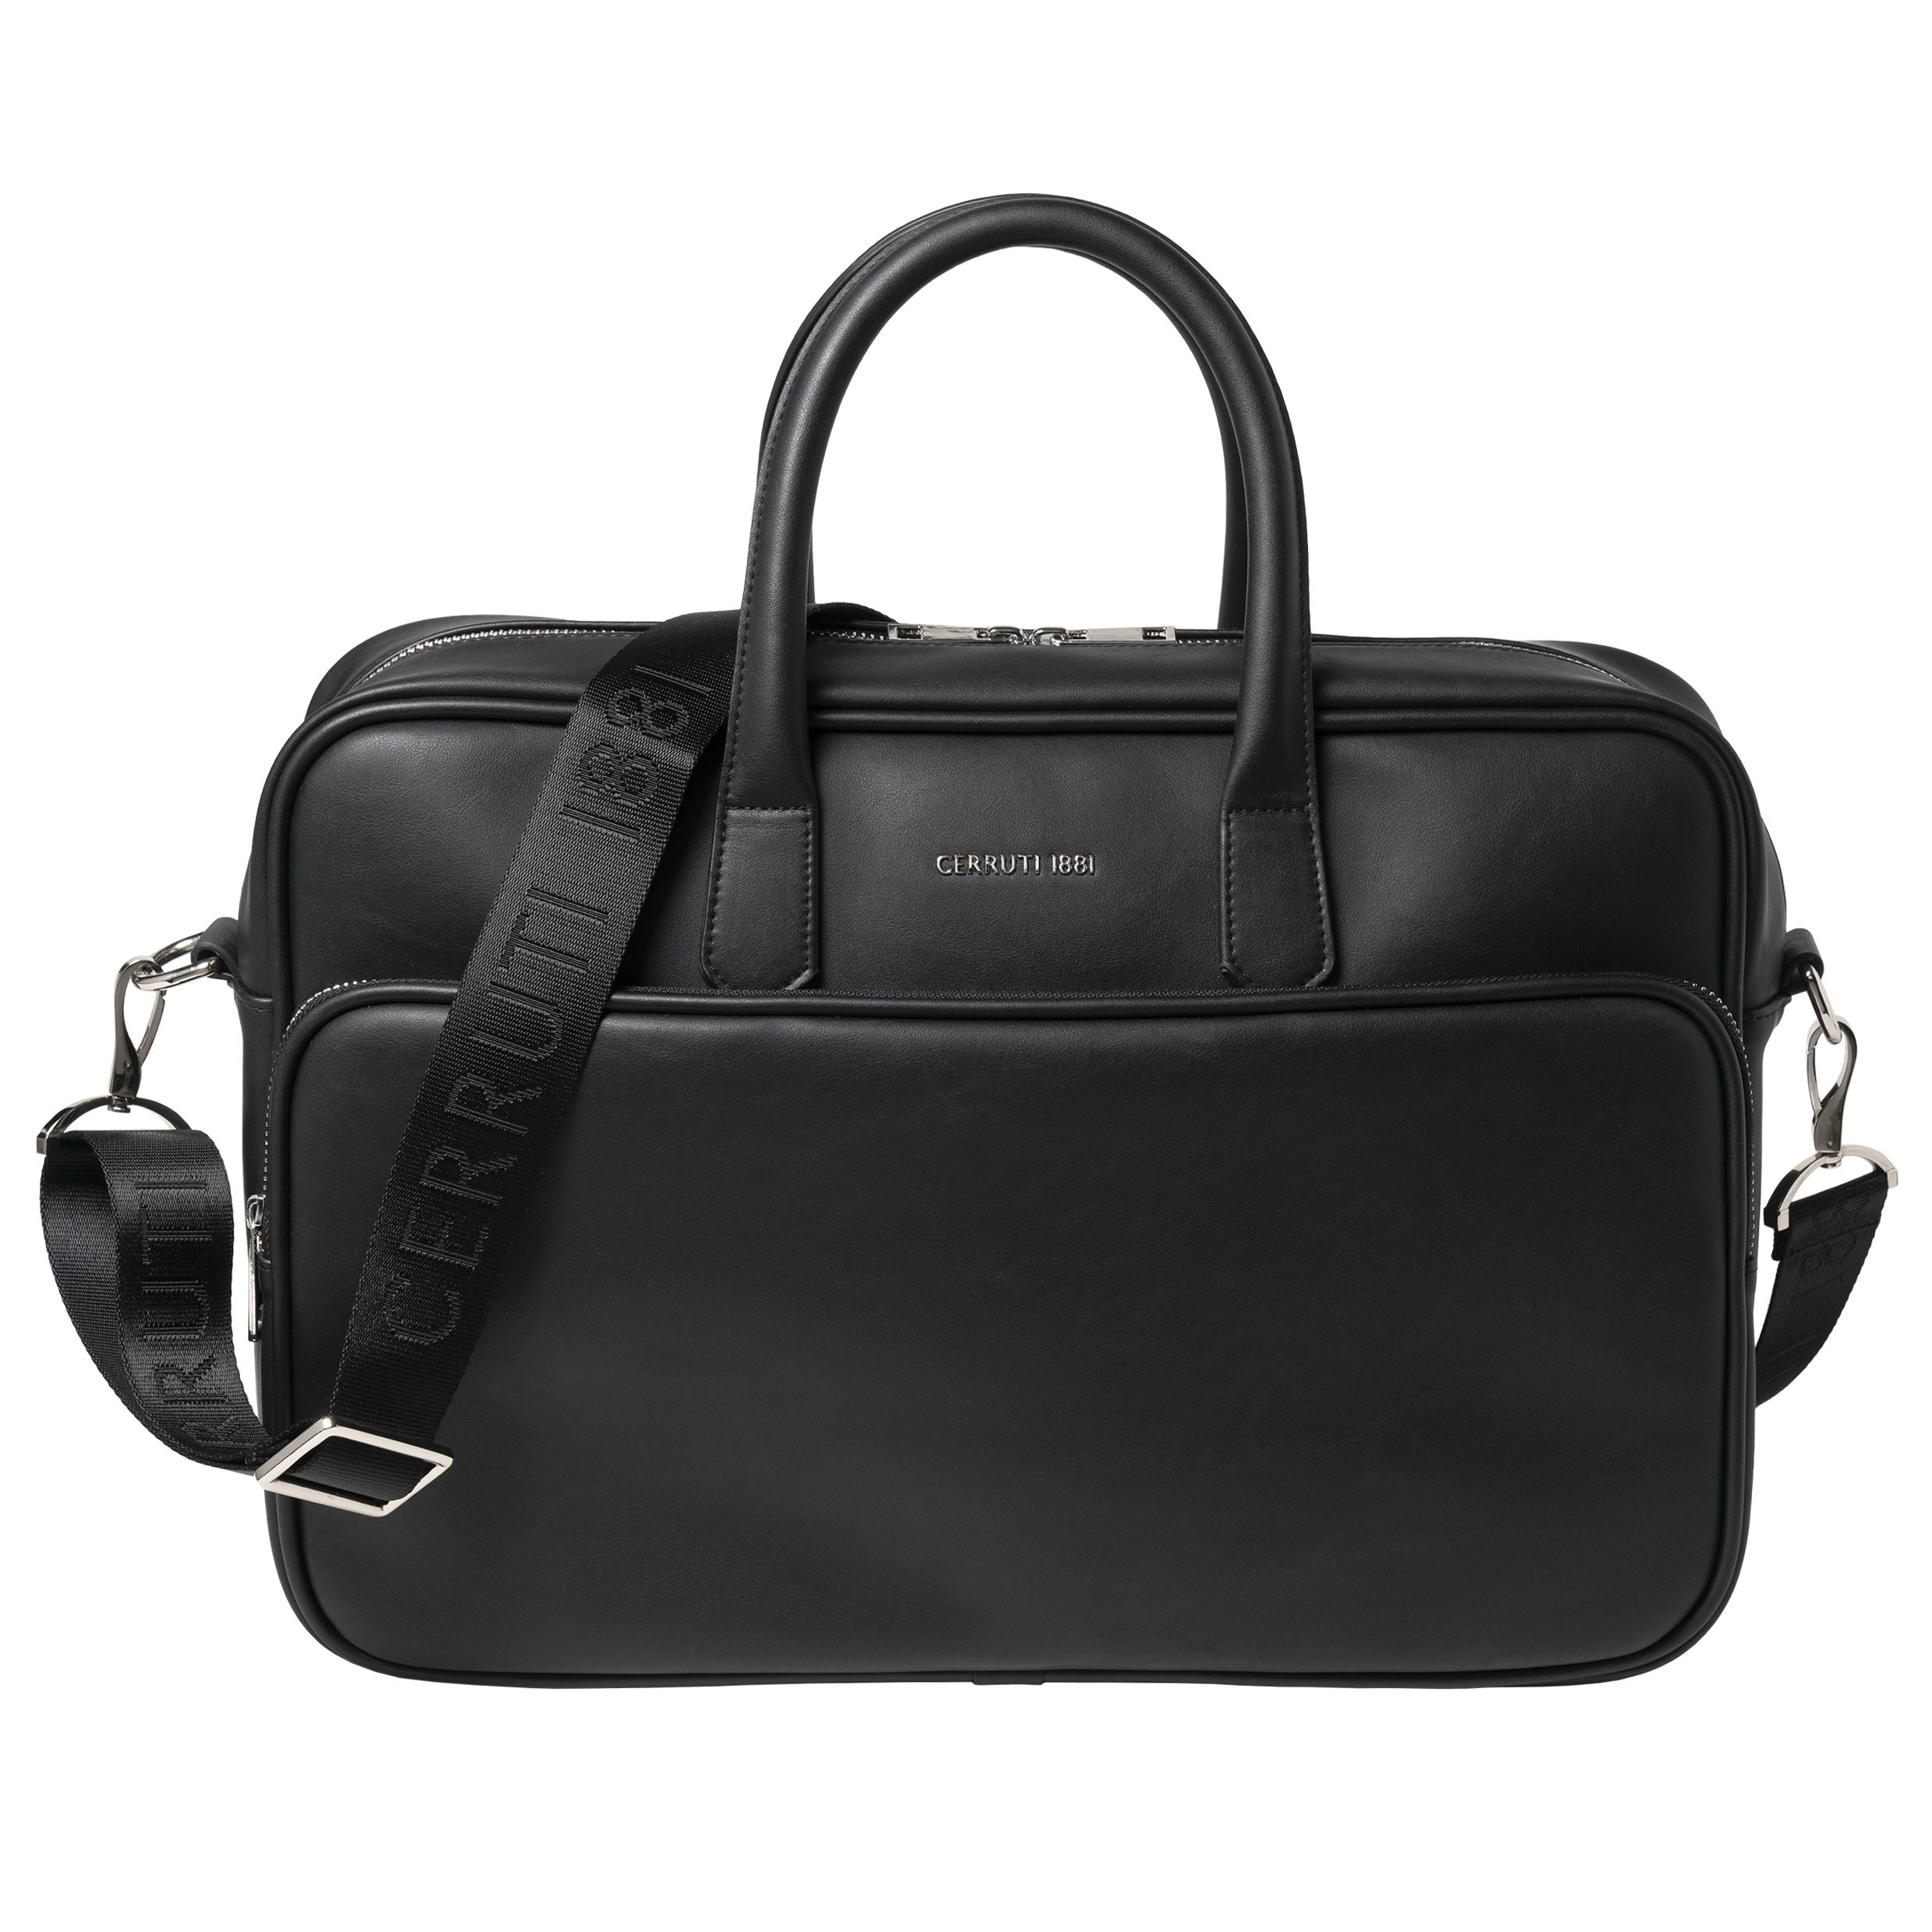 black document bag ZOOM from Cerruti 1881 business gifts – Luxury Corporate Gifts B2B Gifts HK